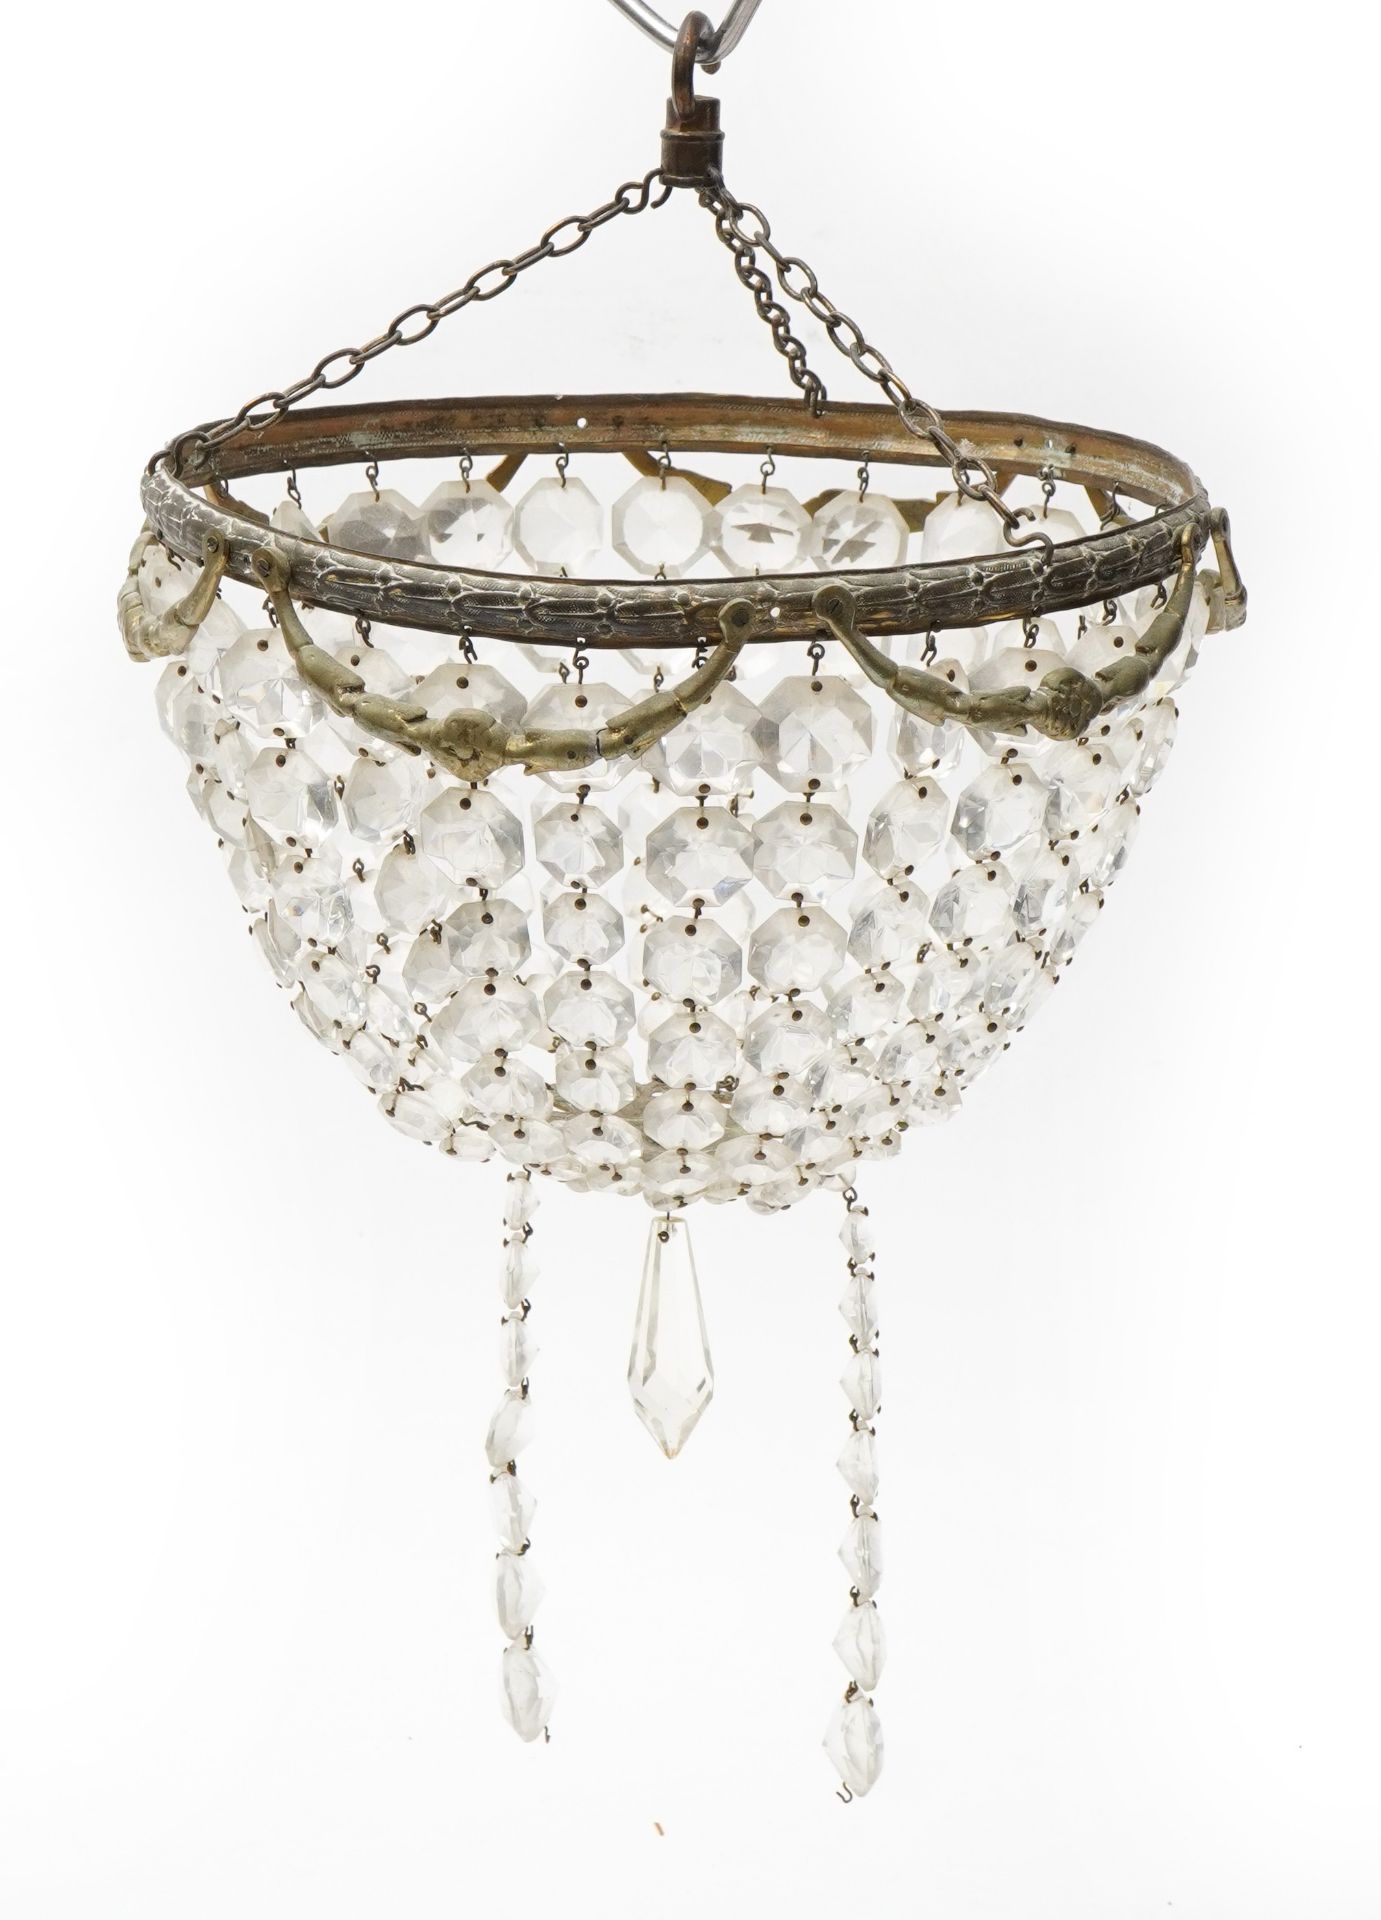 Two brass bag chandeliers with cut glass drops, the largest 26cm in diameter : For further - Image 3 of 6